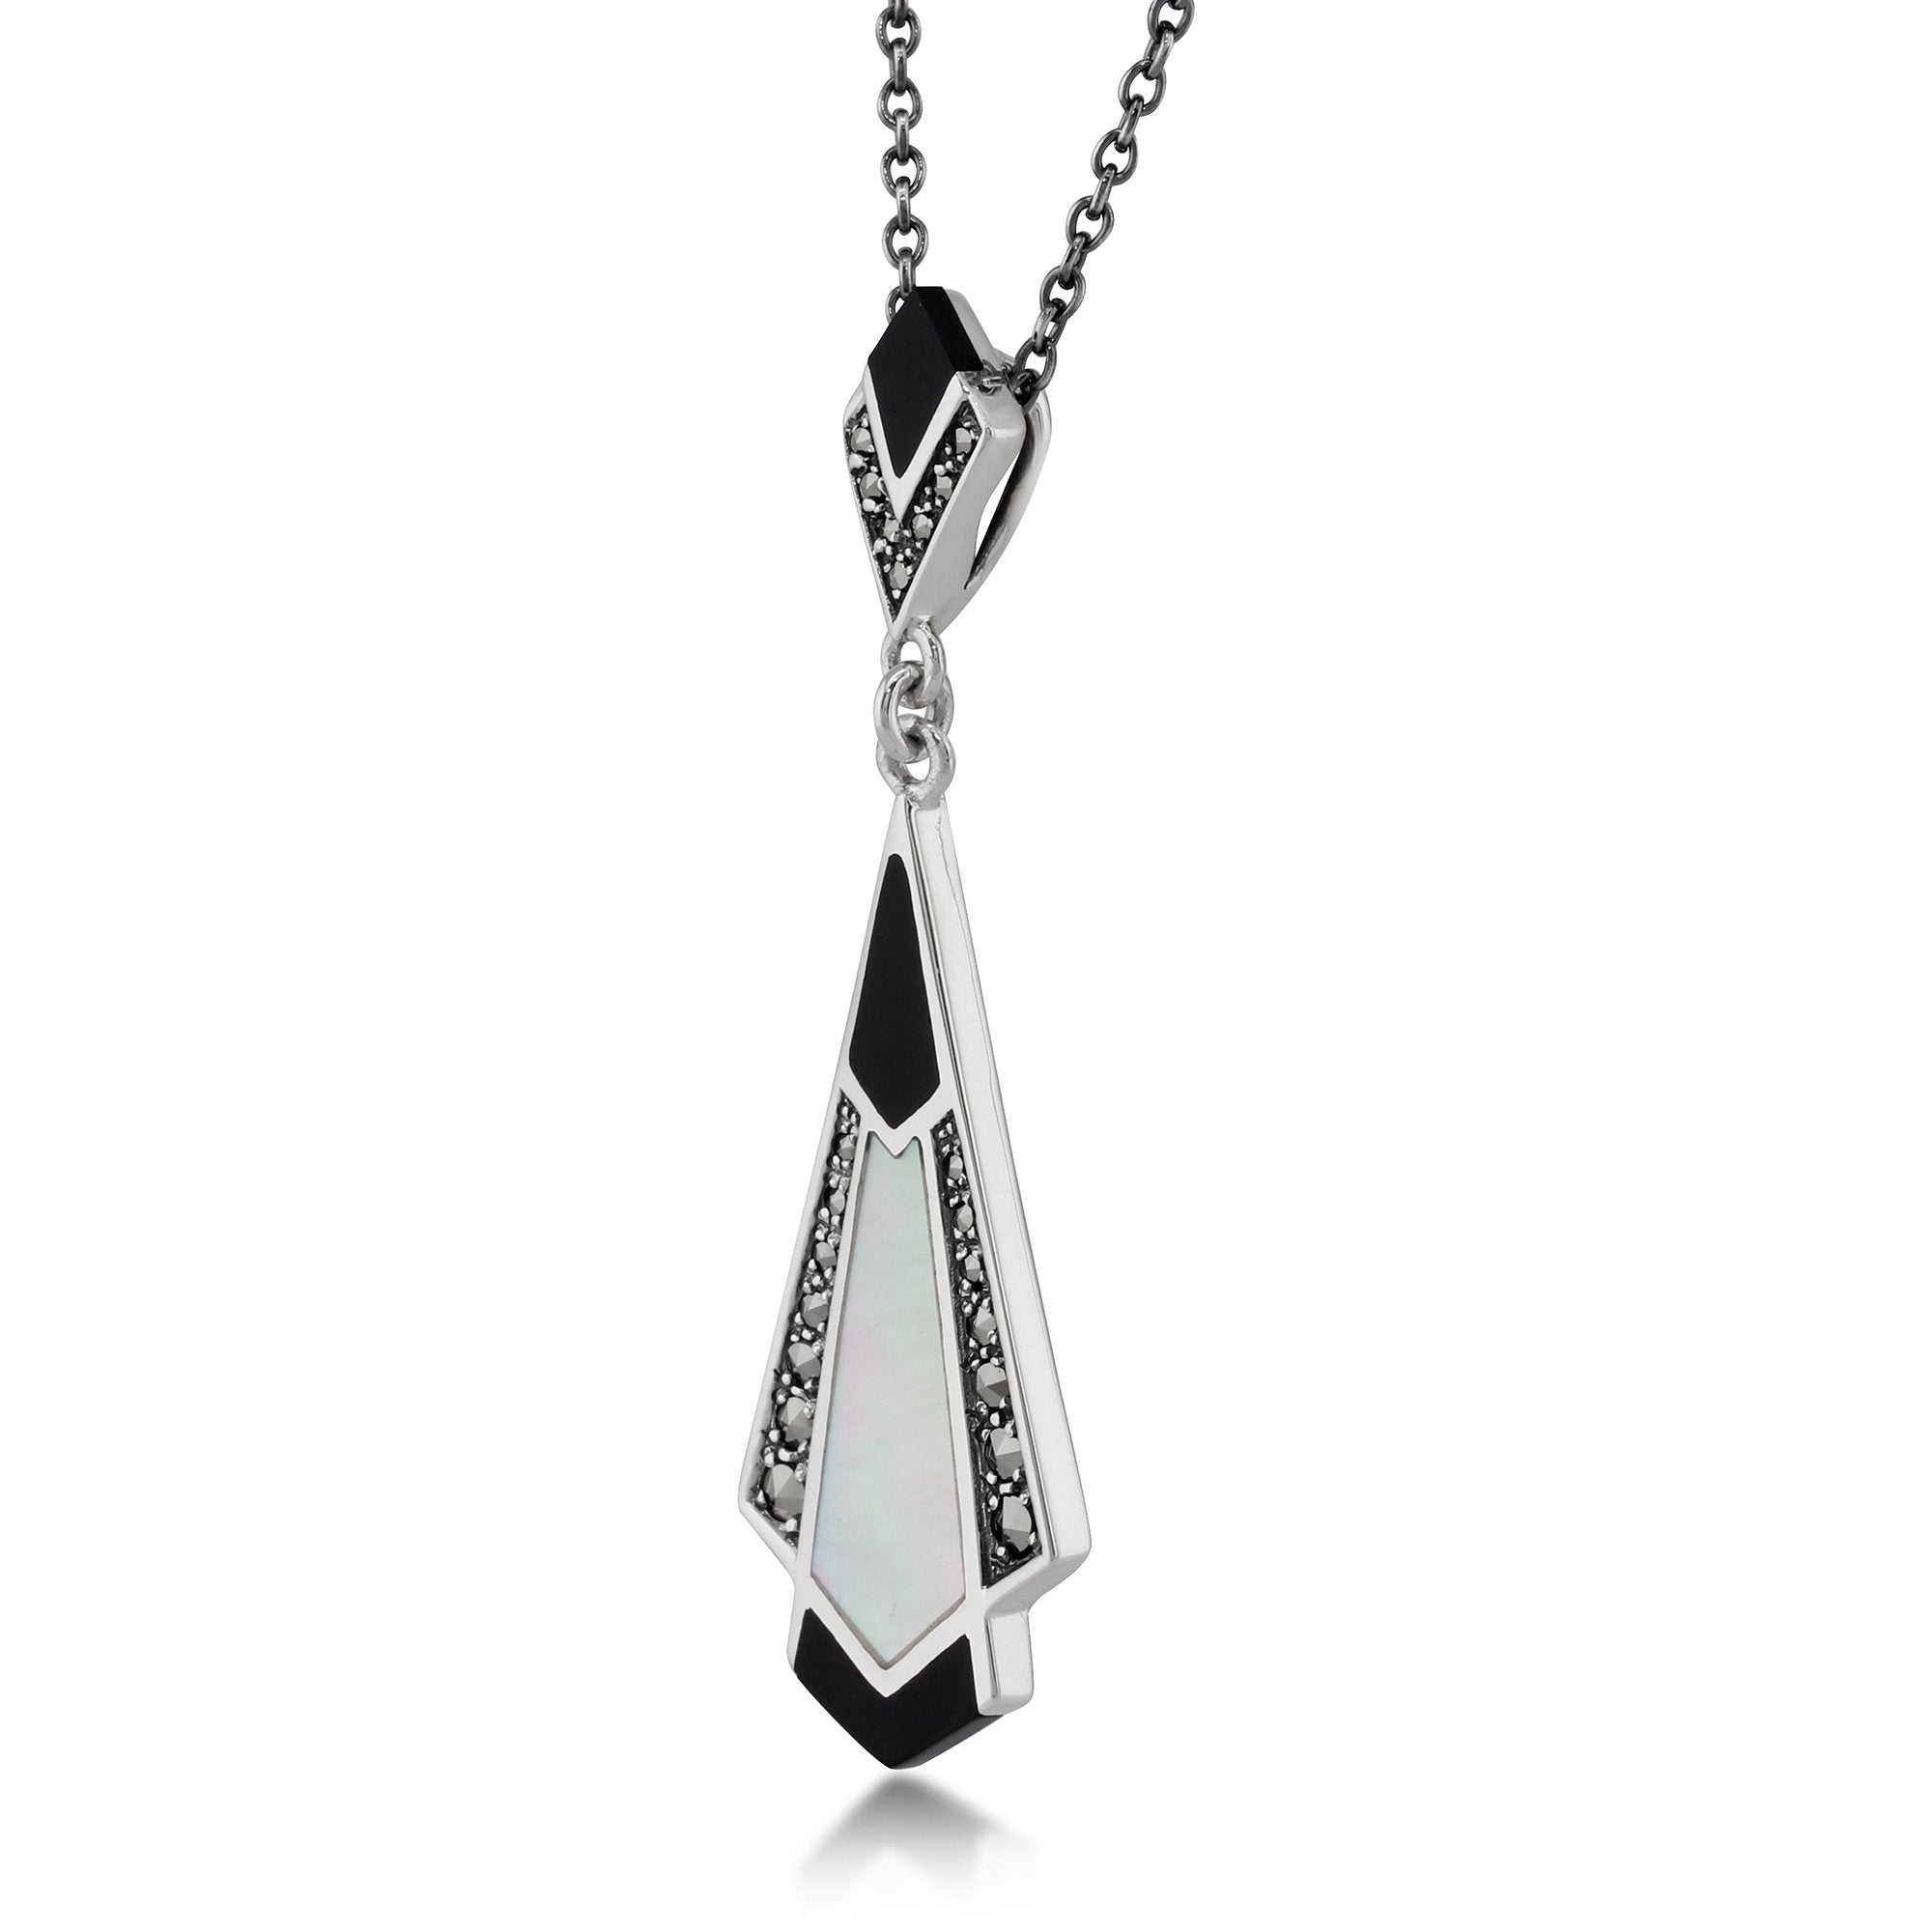 Art Deco Style Cabochon Black Onyx, Mother of Pearl & Marcasite Pendant in 925 Sterling Silver